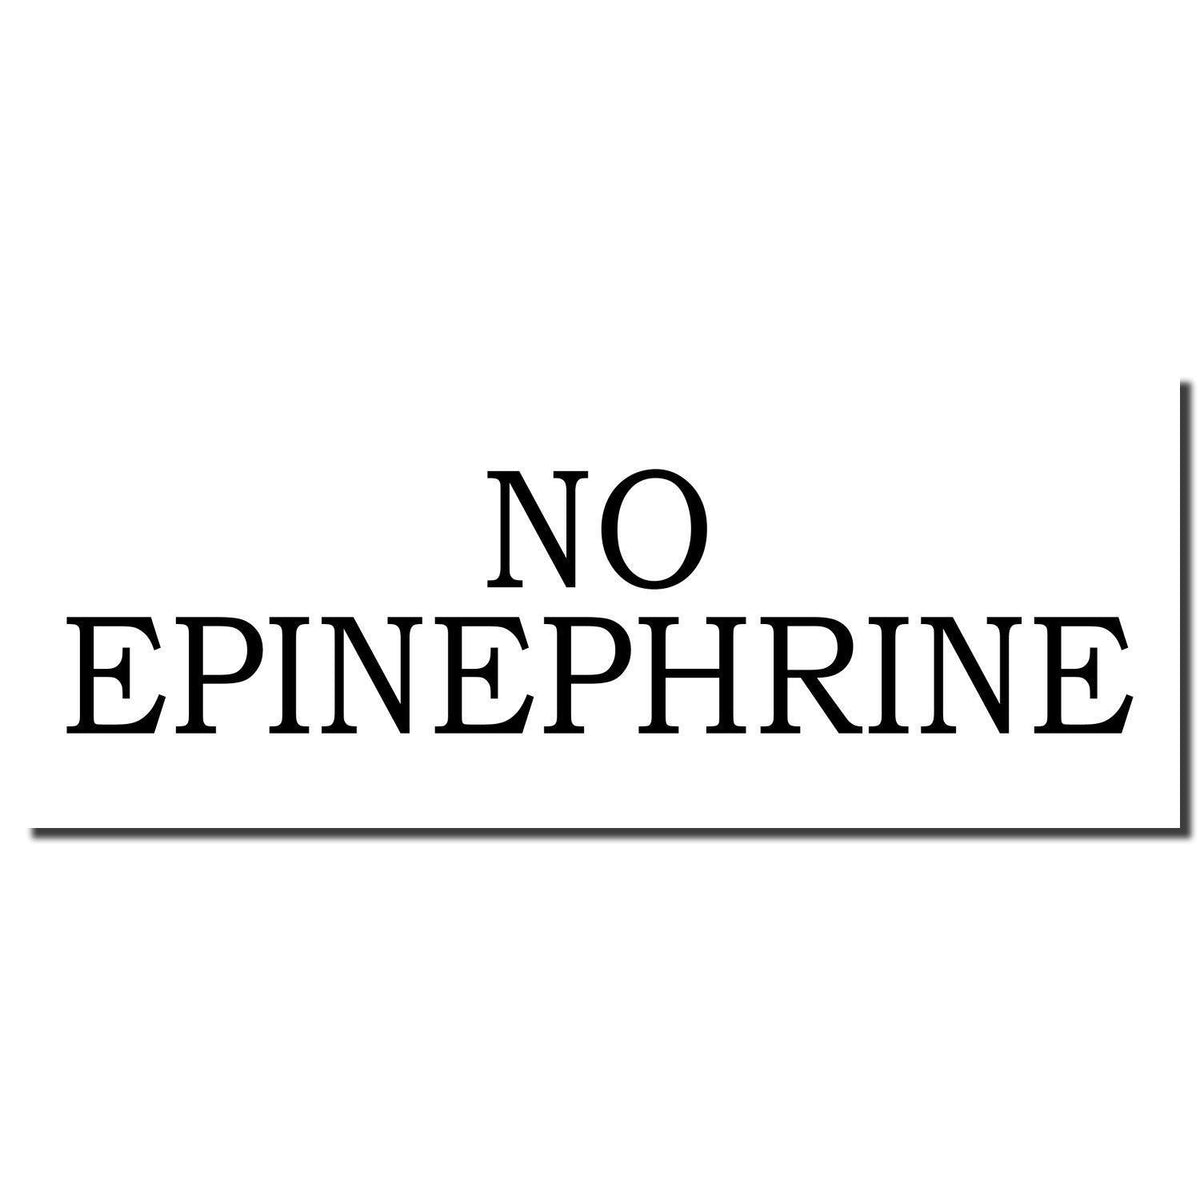 No Epinephrine Medical Rubber Stamp - Engineer Seal Stamps - Brand_Acorn, Impression Size_Small, Stamp Type_Regular Stamp, Type of Use_Medical Office